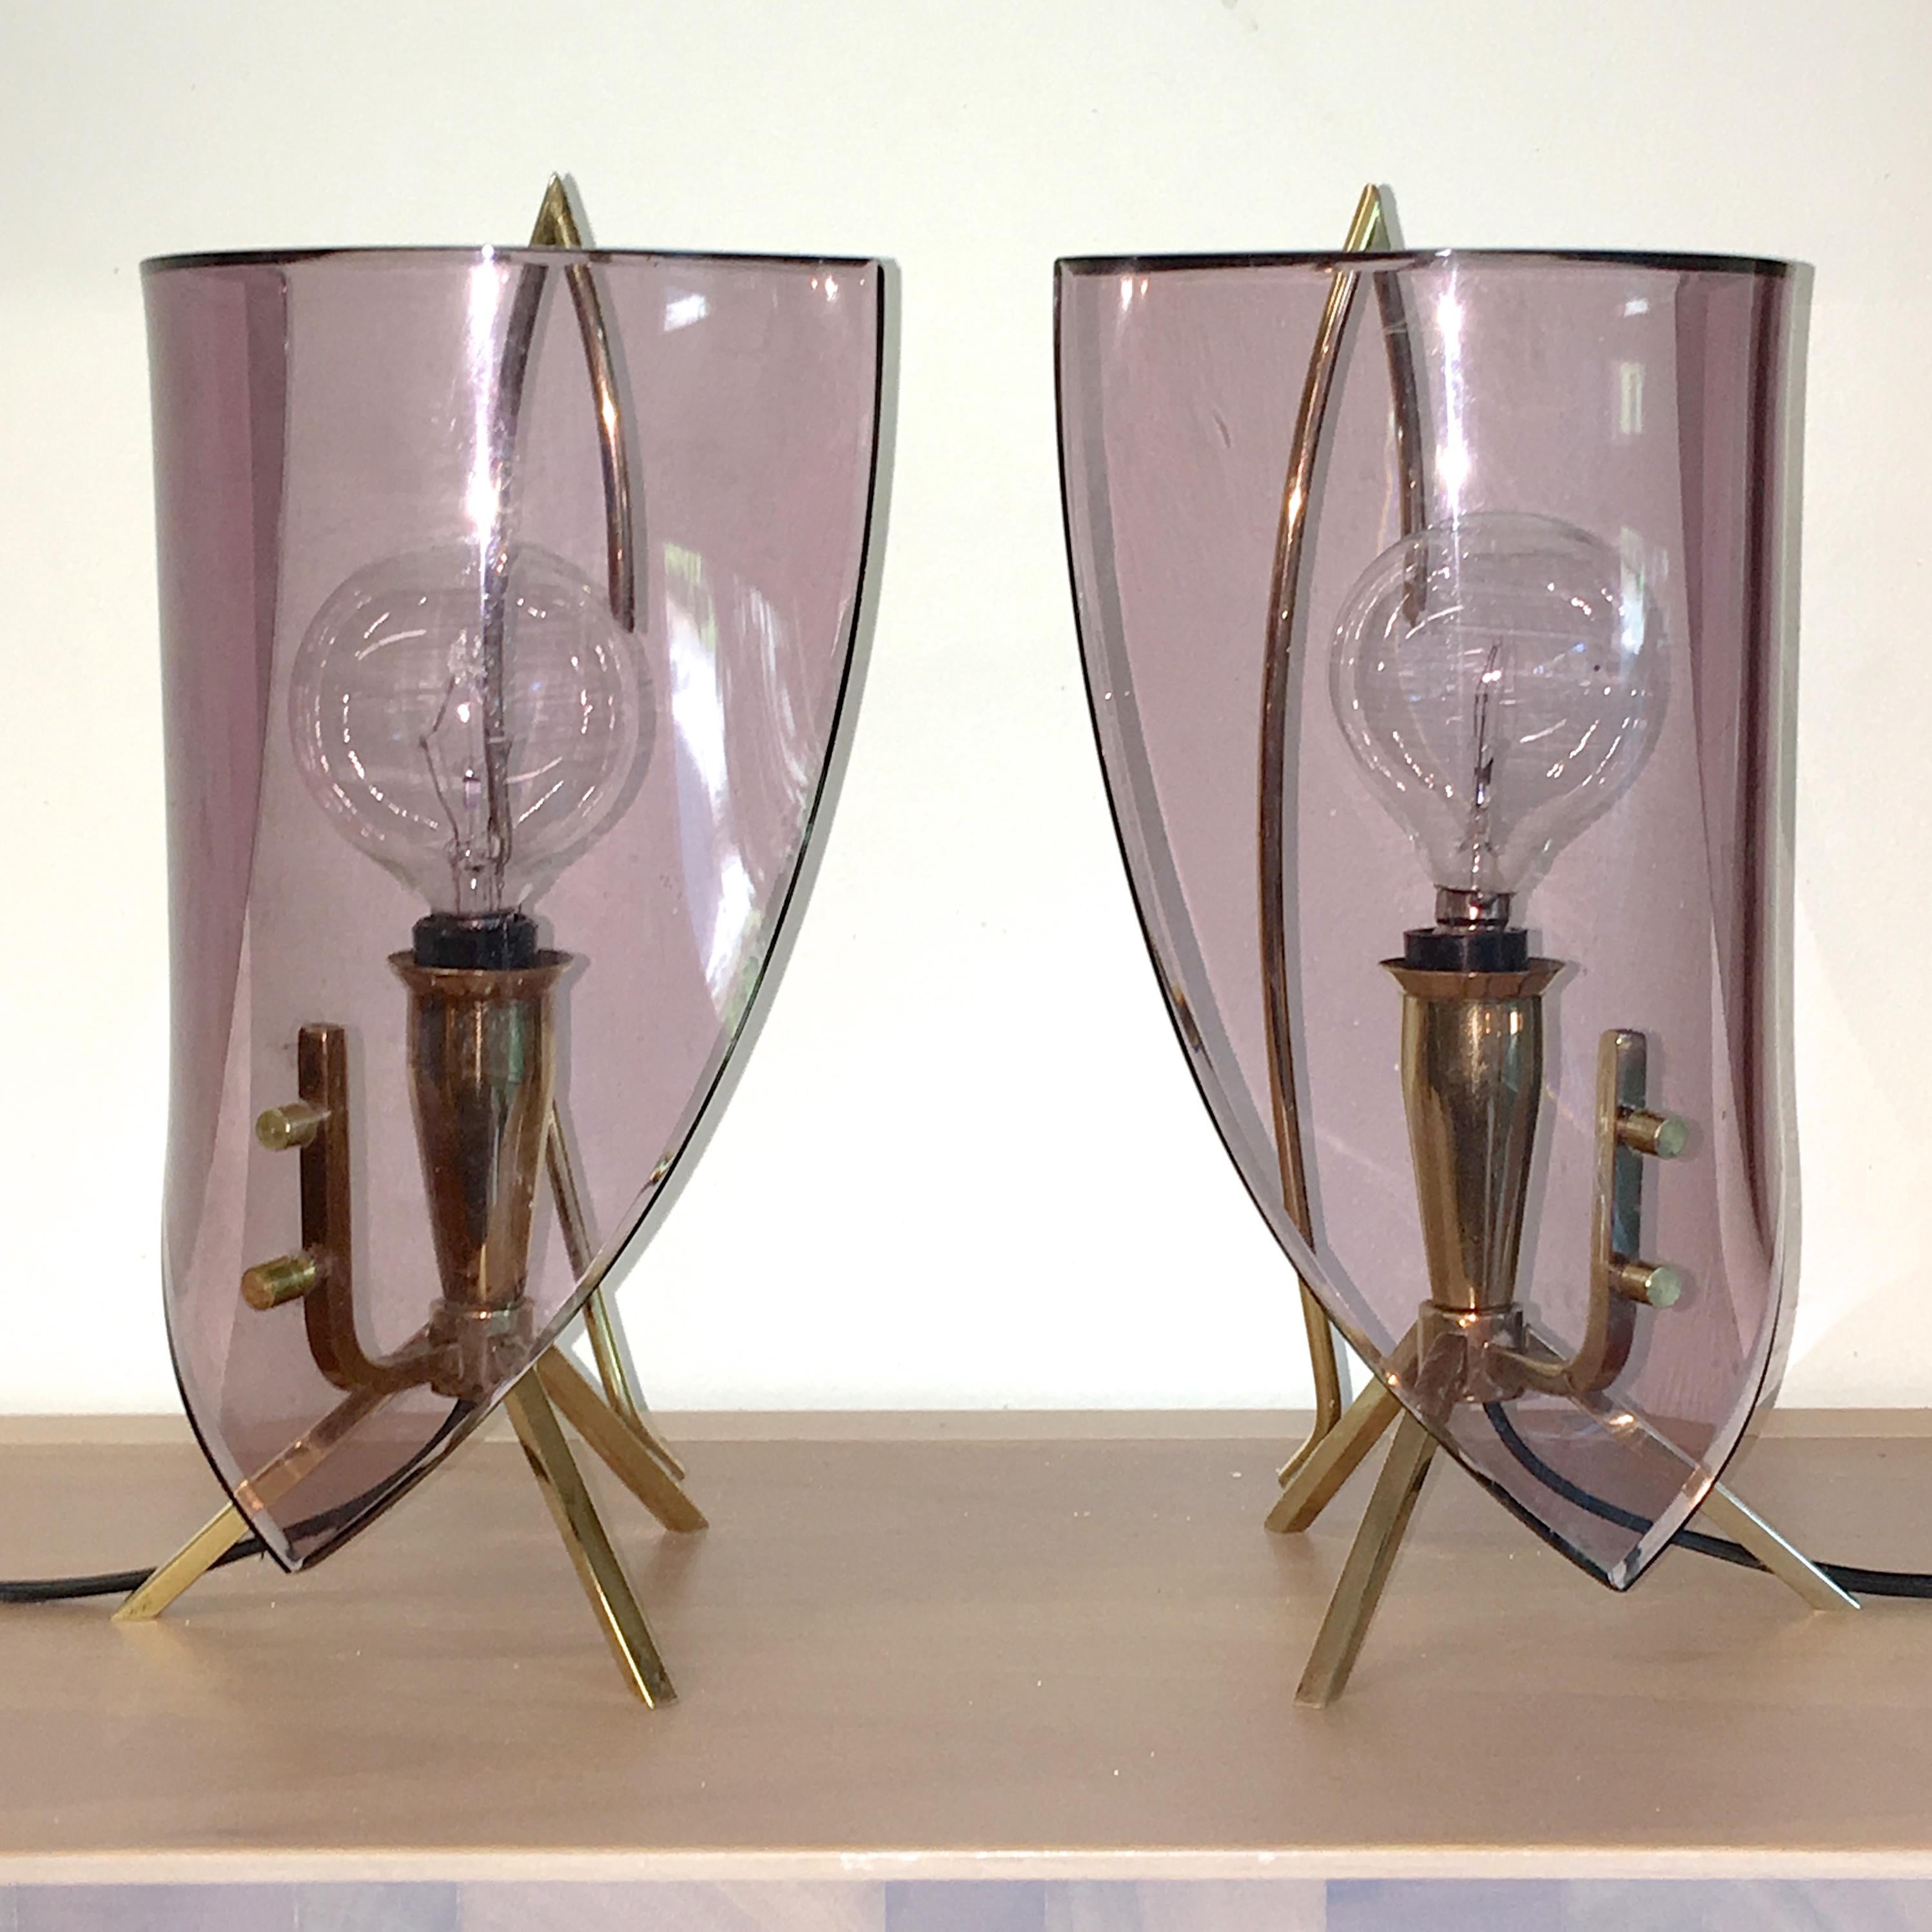 Pair of 1950s Italian bedside table lamps produced by Stilux Milano and attributed to the designer Oscar Torlasco. 

Solid brass modernist structure, not unlike a candle stand, with tripod legs and a single candelabra bulb in tapered brass cone